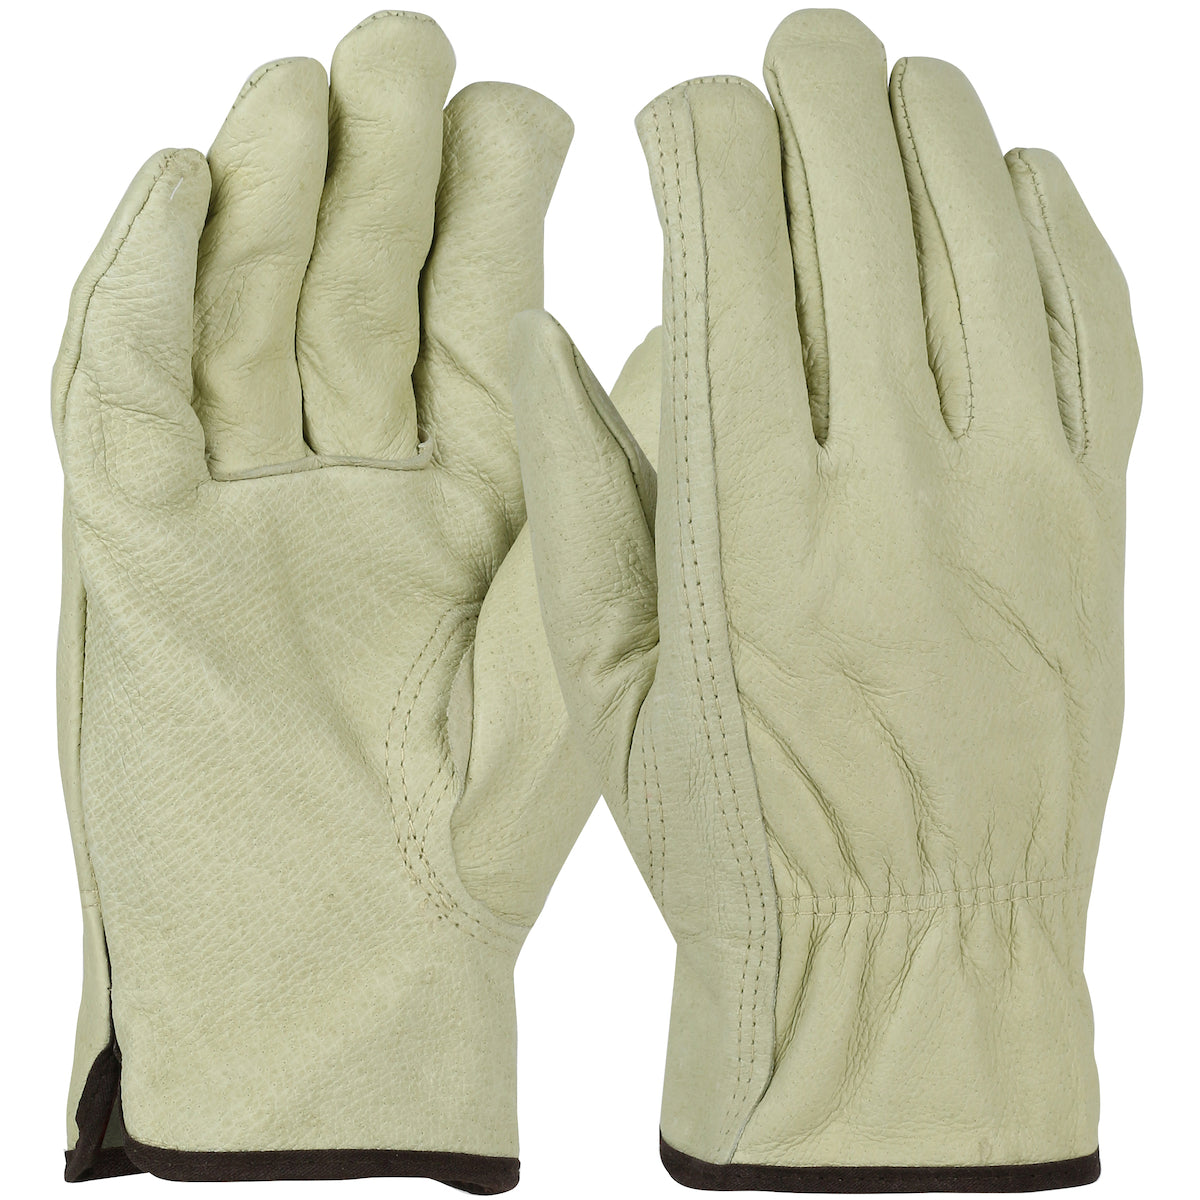 West Chester 994KF/XXL Economy Top Grain Pigskin Leather Drivers Glove with Red Fleece Lining - Keystone Thumb